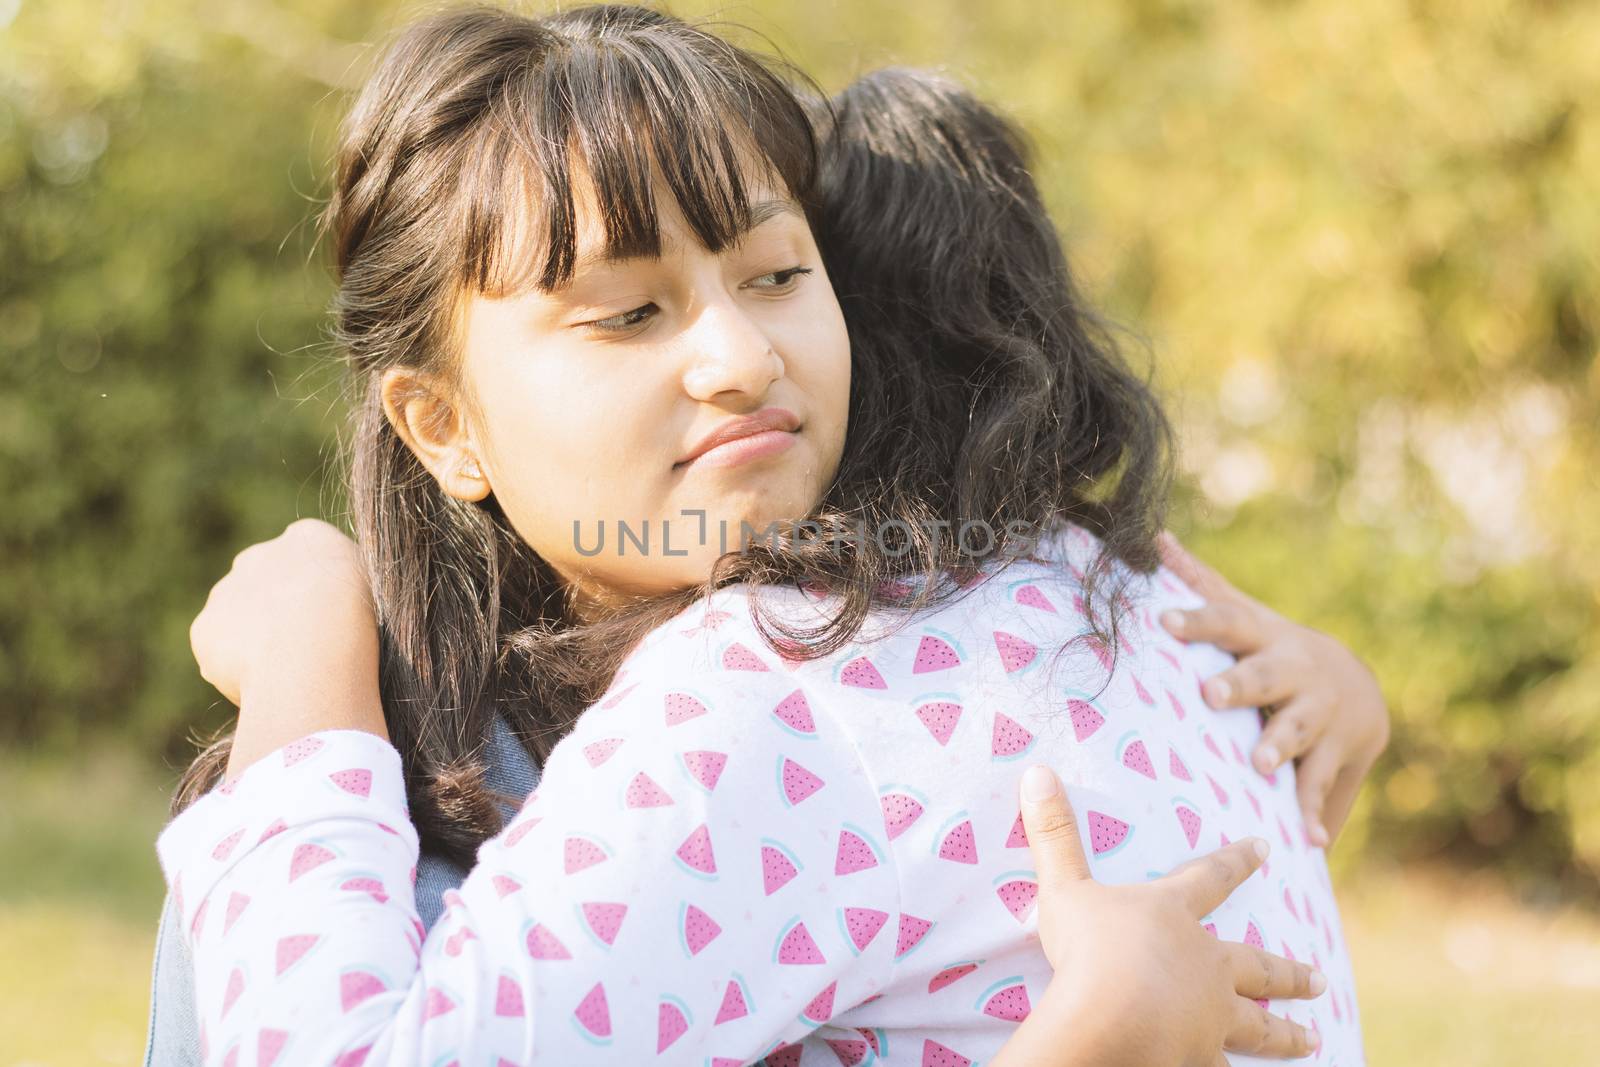 Concept of fake hug, friendship, embracing or two faced - Young teenager Hypocritical girl embracing sad friend at park